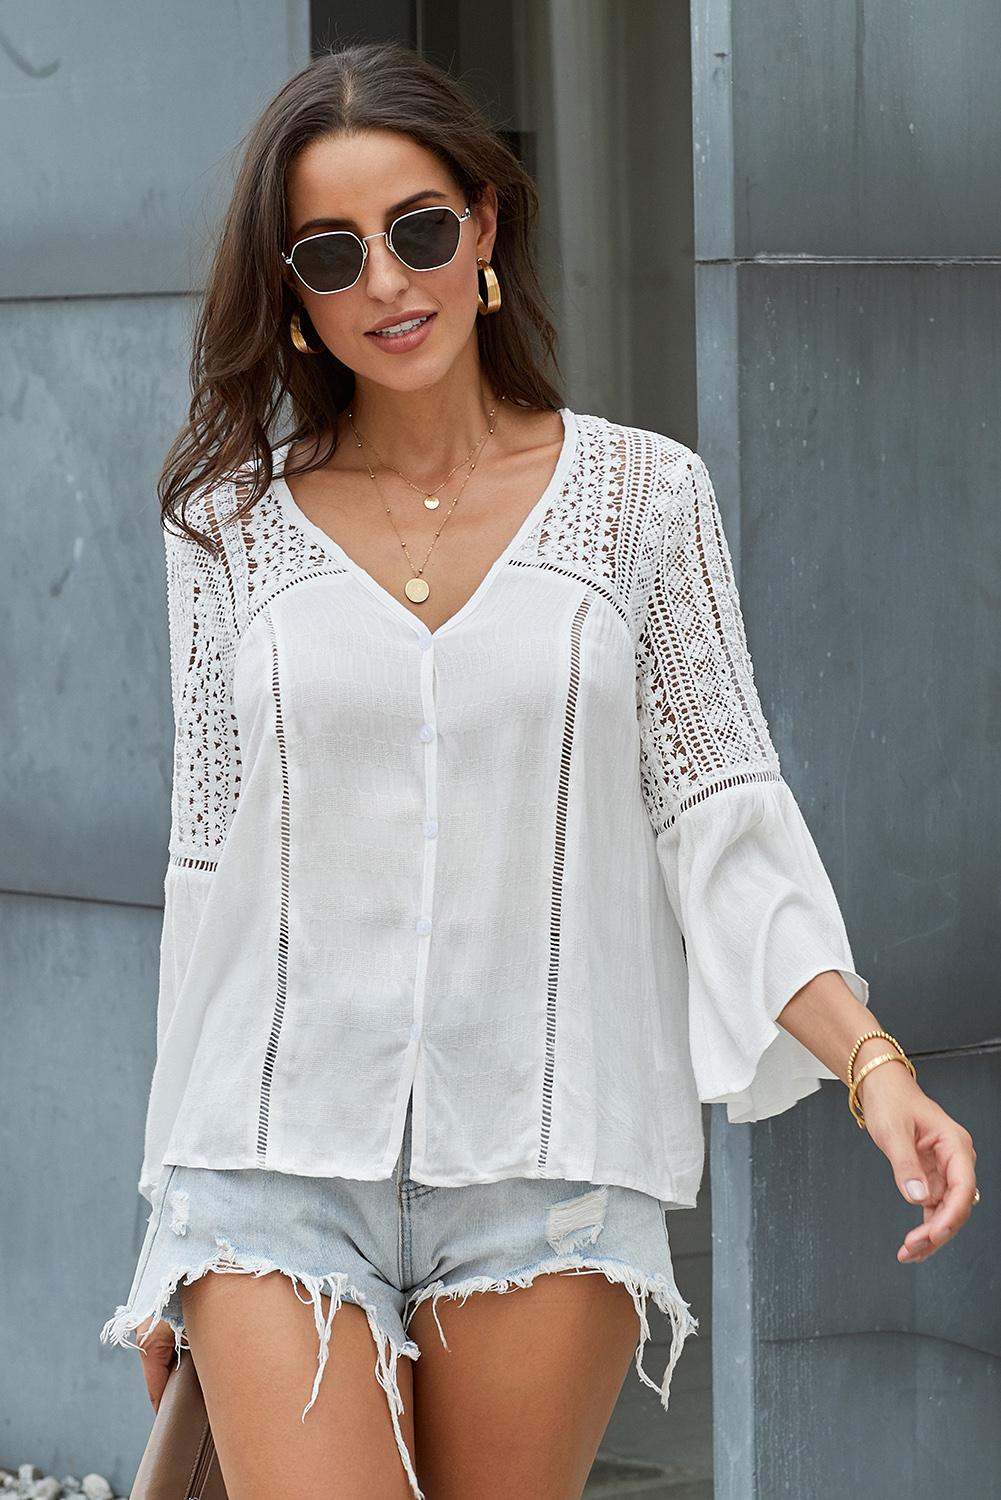 Flare Sleeve Spliced Lace V-Neck Shirt (Available in 5 Colors)